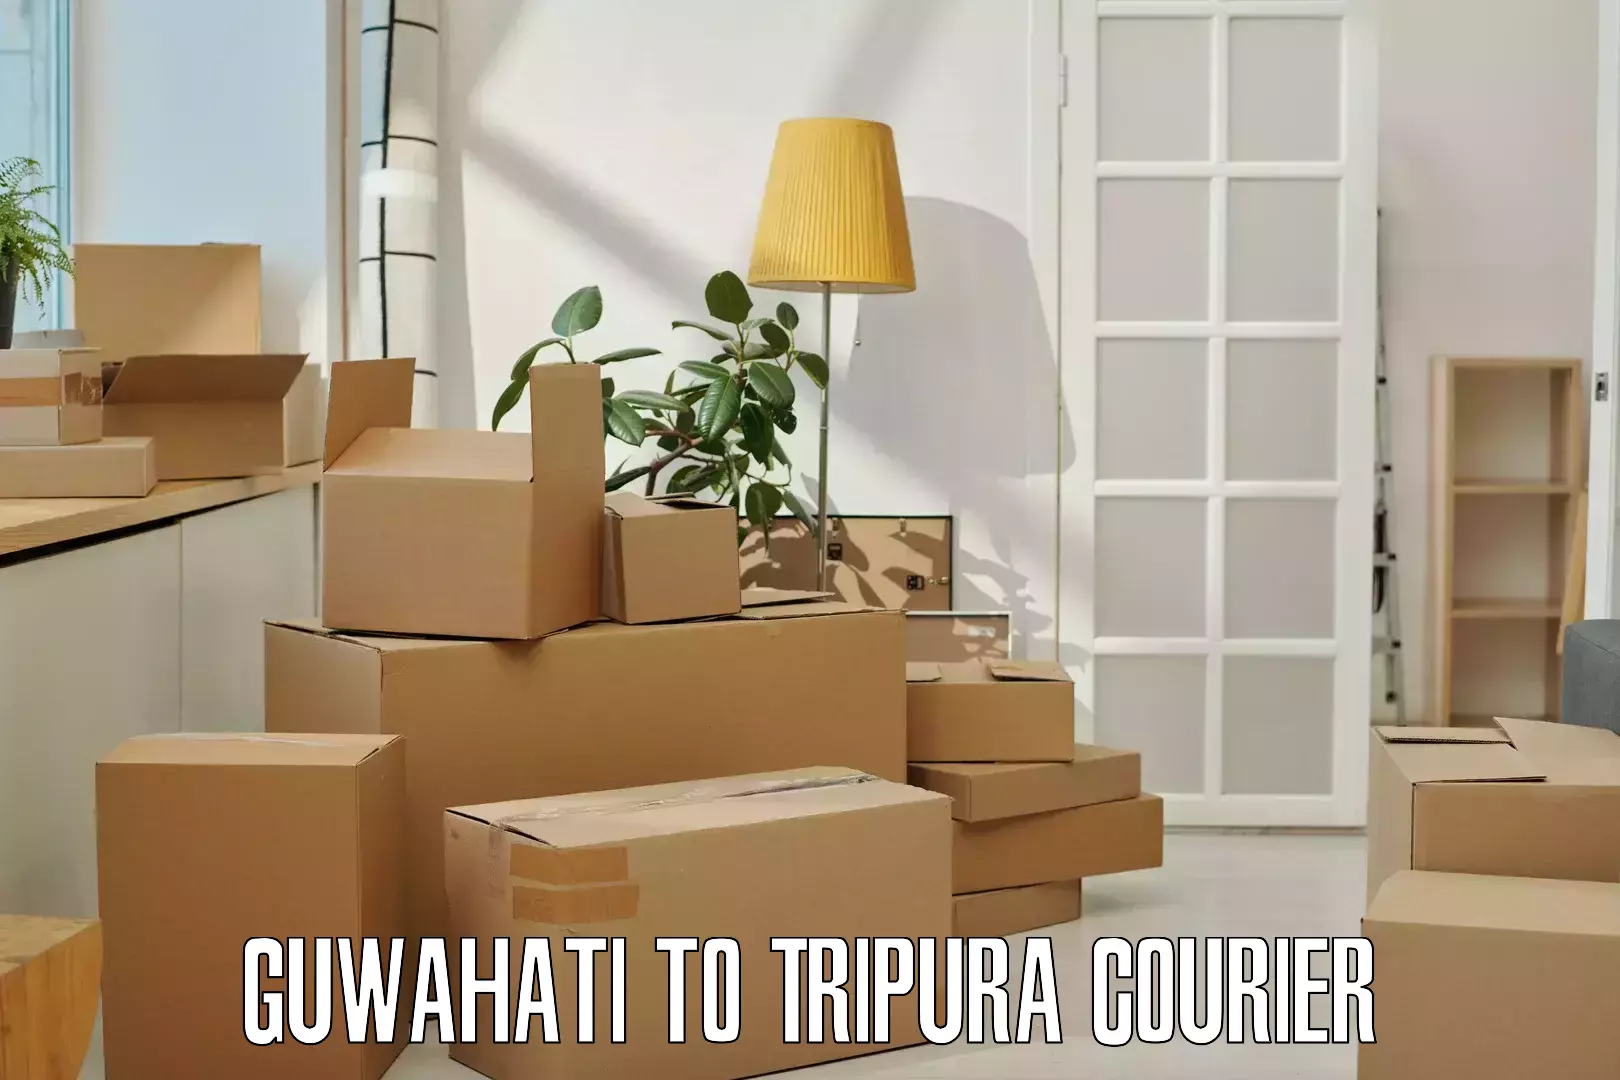 Fastest parcel delivery in Guwahati to Amarpur